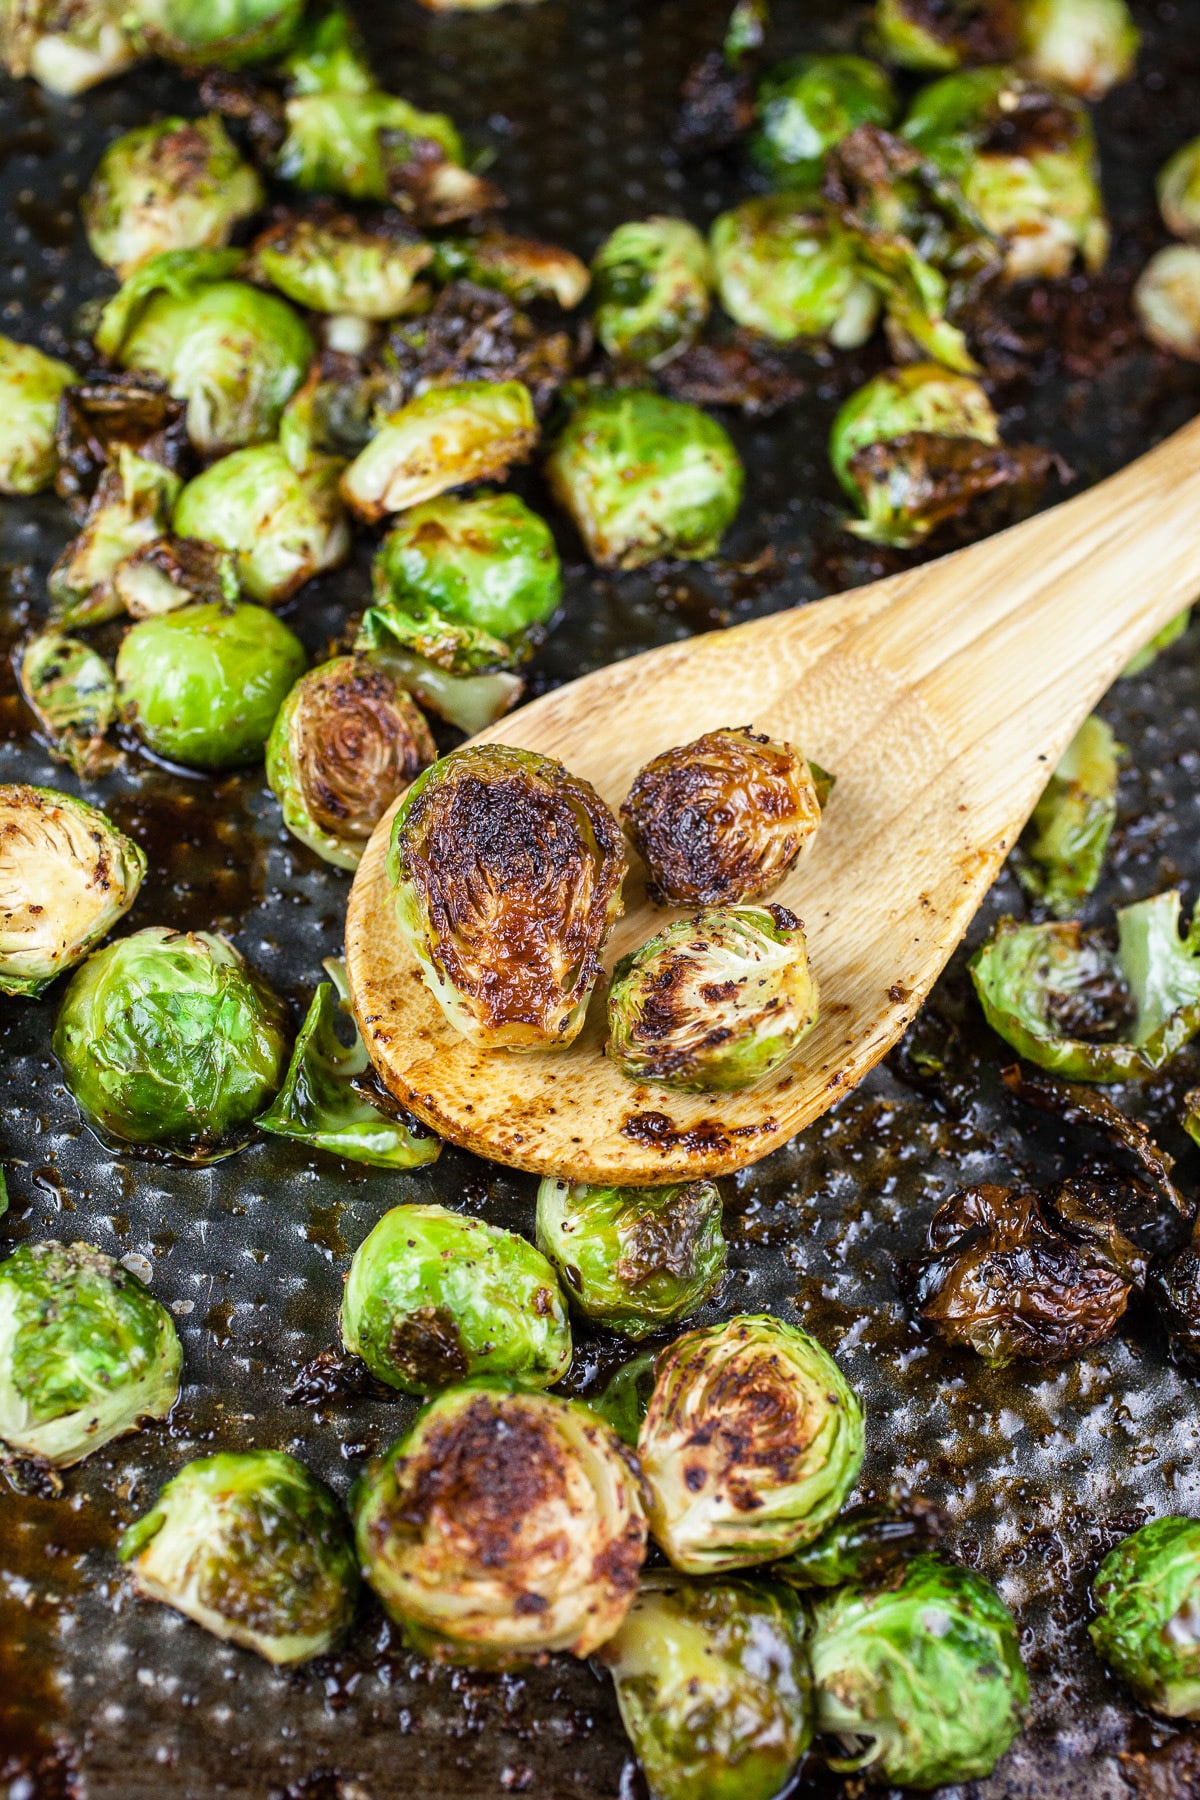 Roasted Brussels sprouts tossed in glaze on baking sheet.